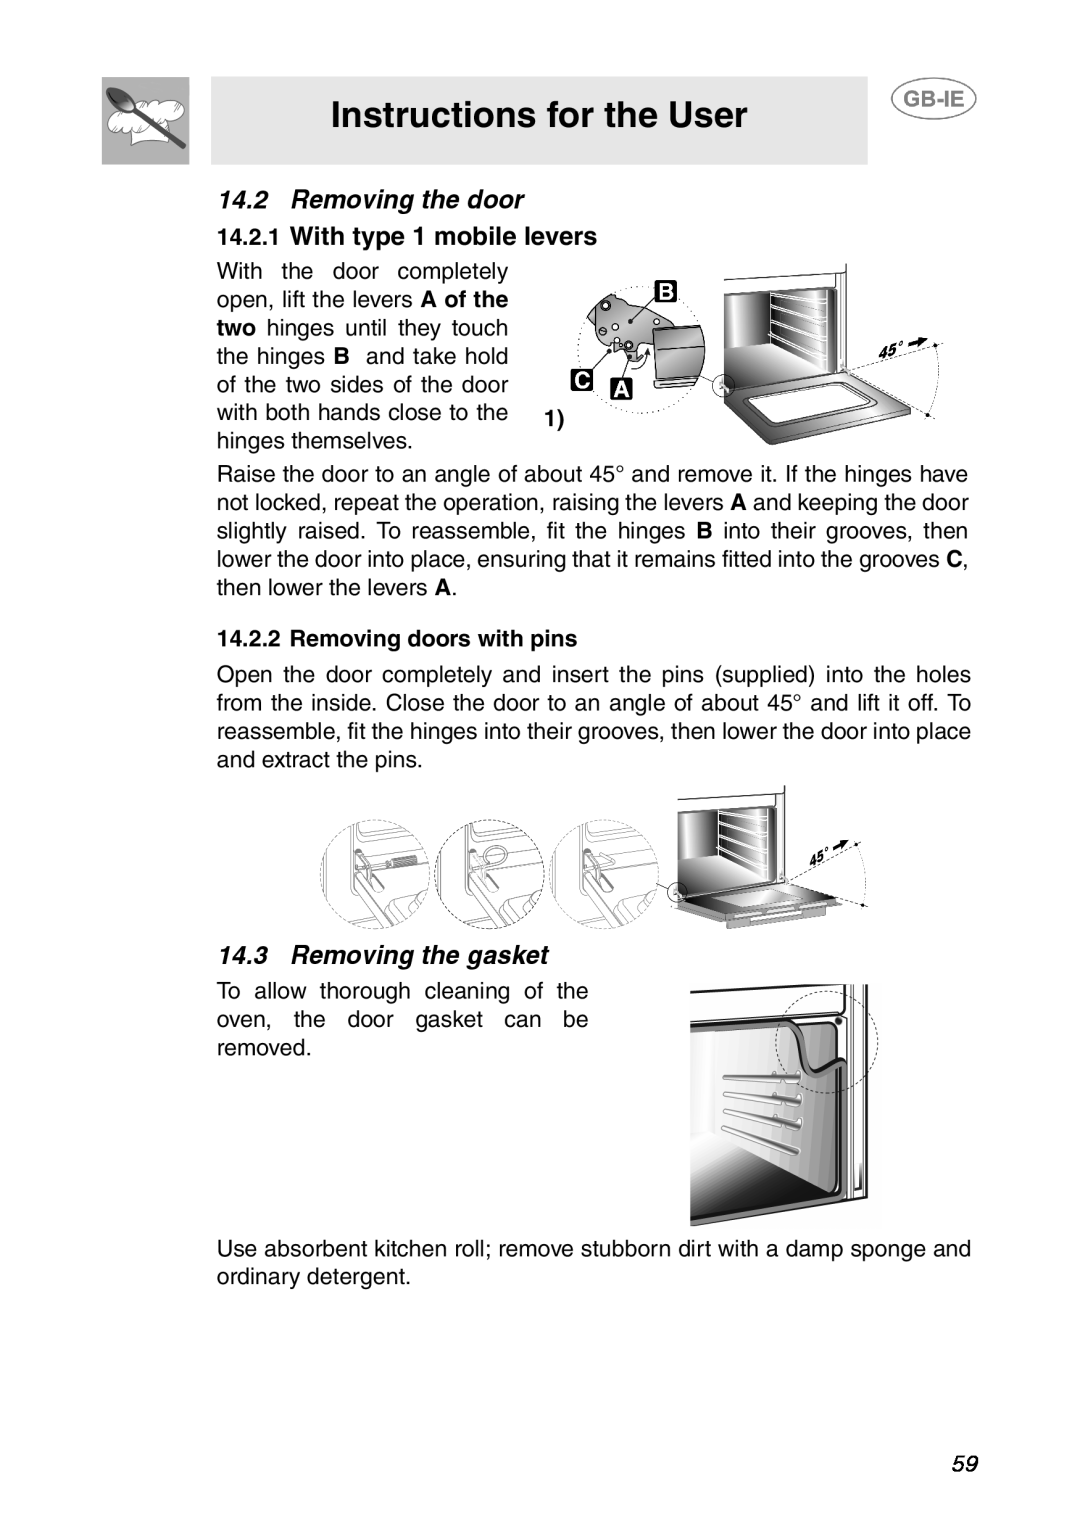 Smeg SE995XT-5, SE995XT-7 Instructions for the User, Removing the door, With type 1 mobile levers, Removing the gasket 